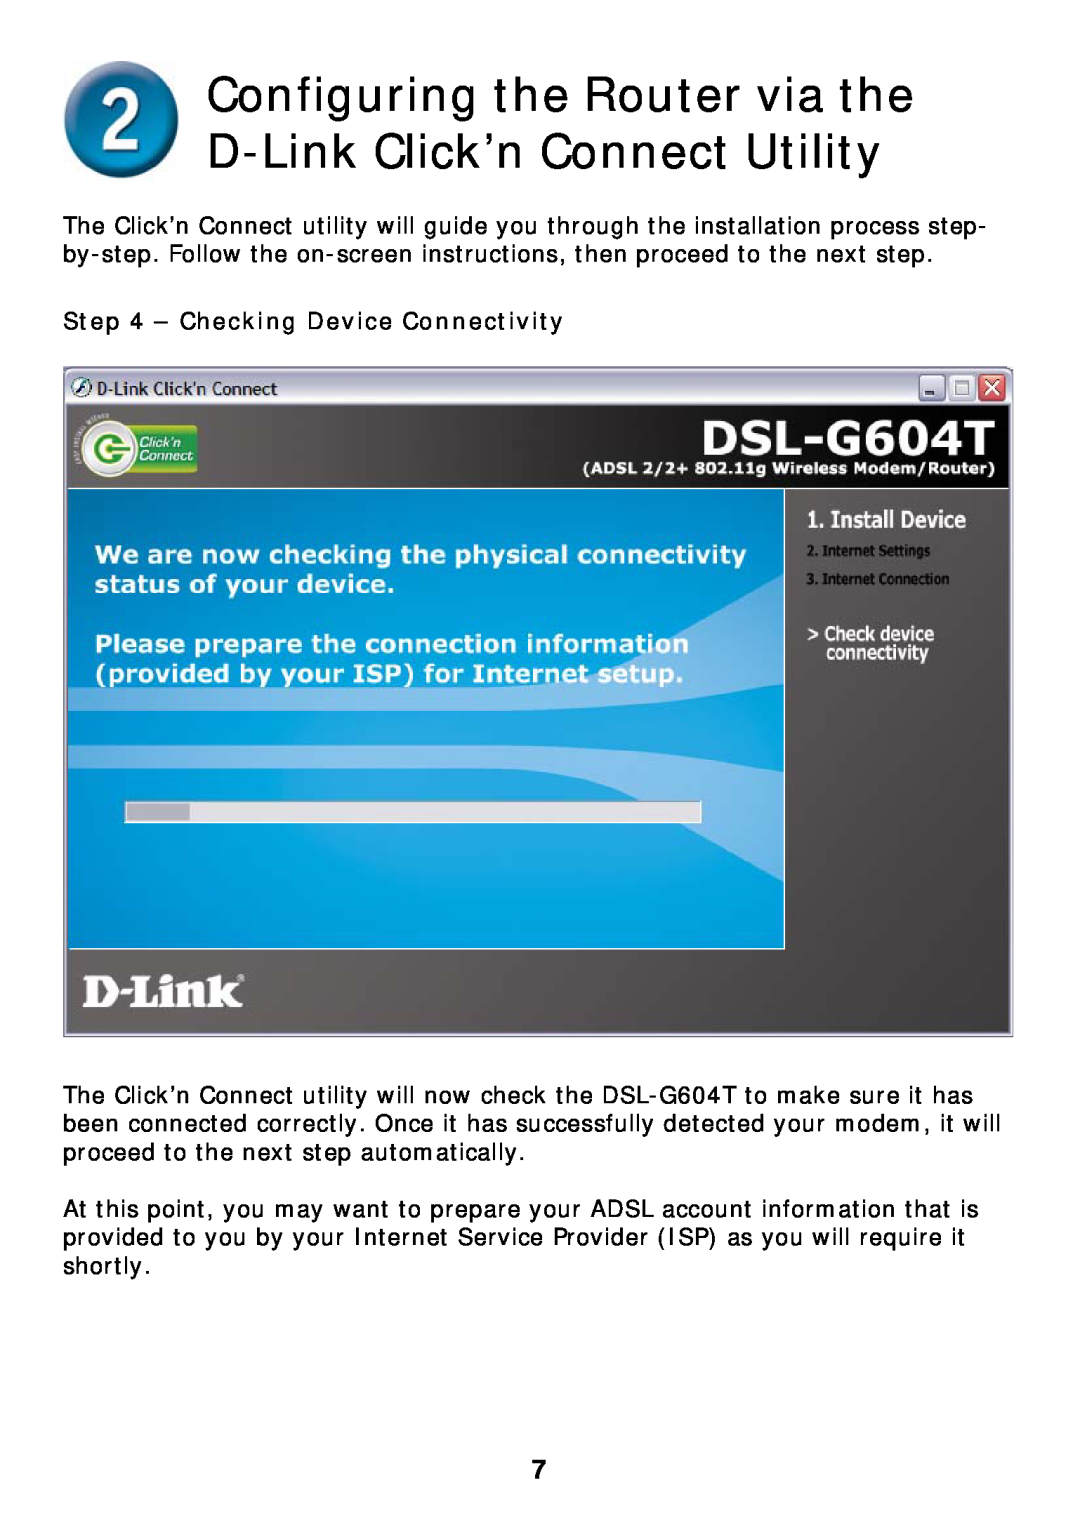 D-Link DSL-G604T specifications Configuring the Router via the D-Link Click’n Connect Utility, Checking Device Connectivity 